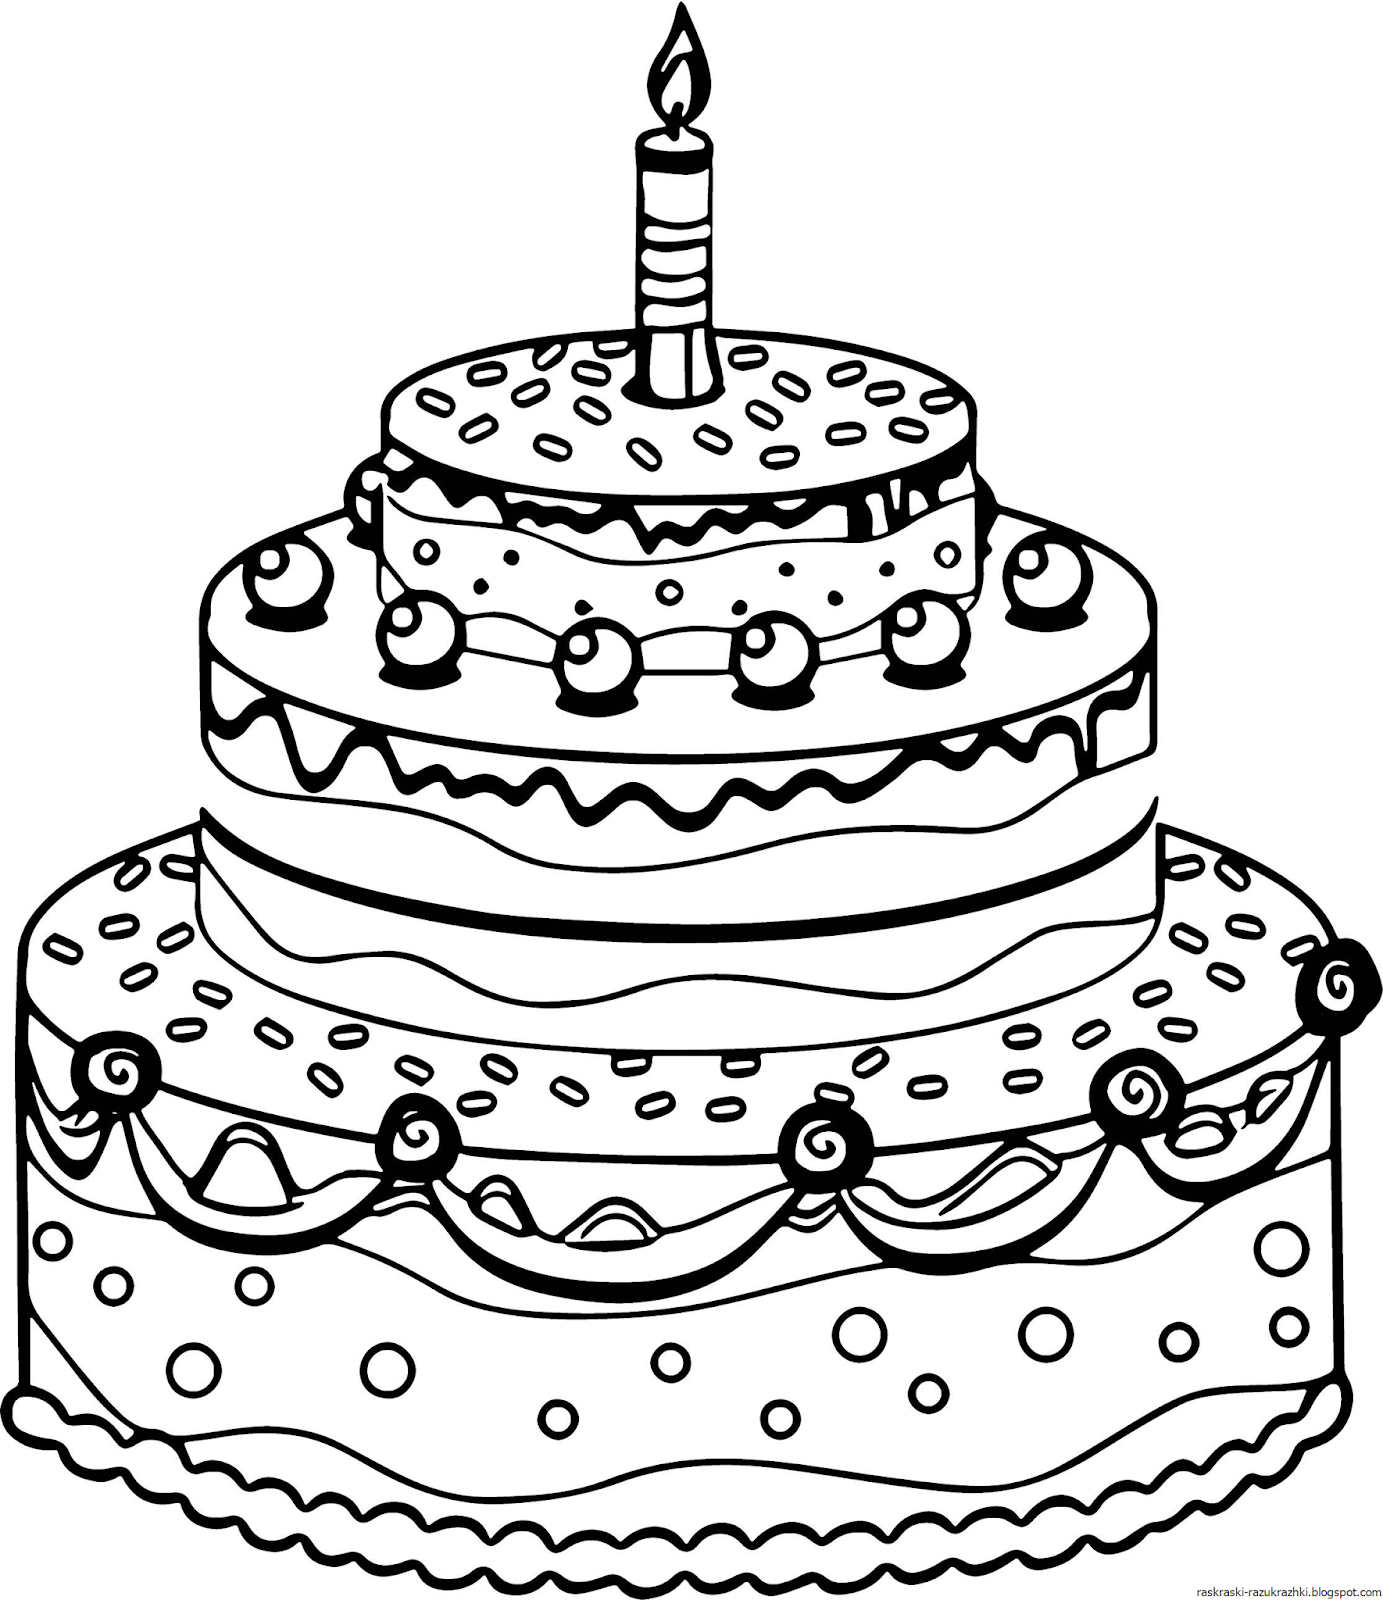 Coloring birthday cake coloring page